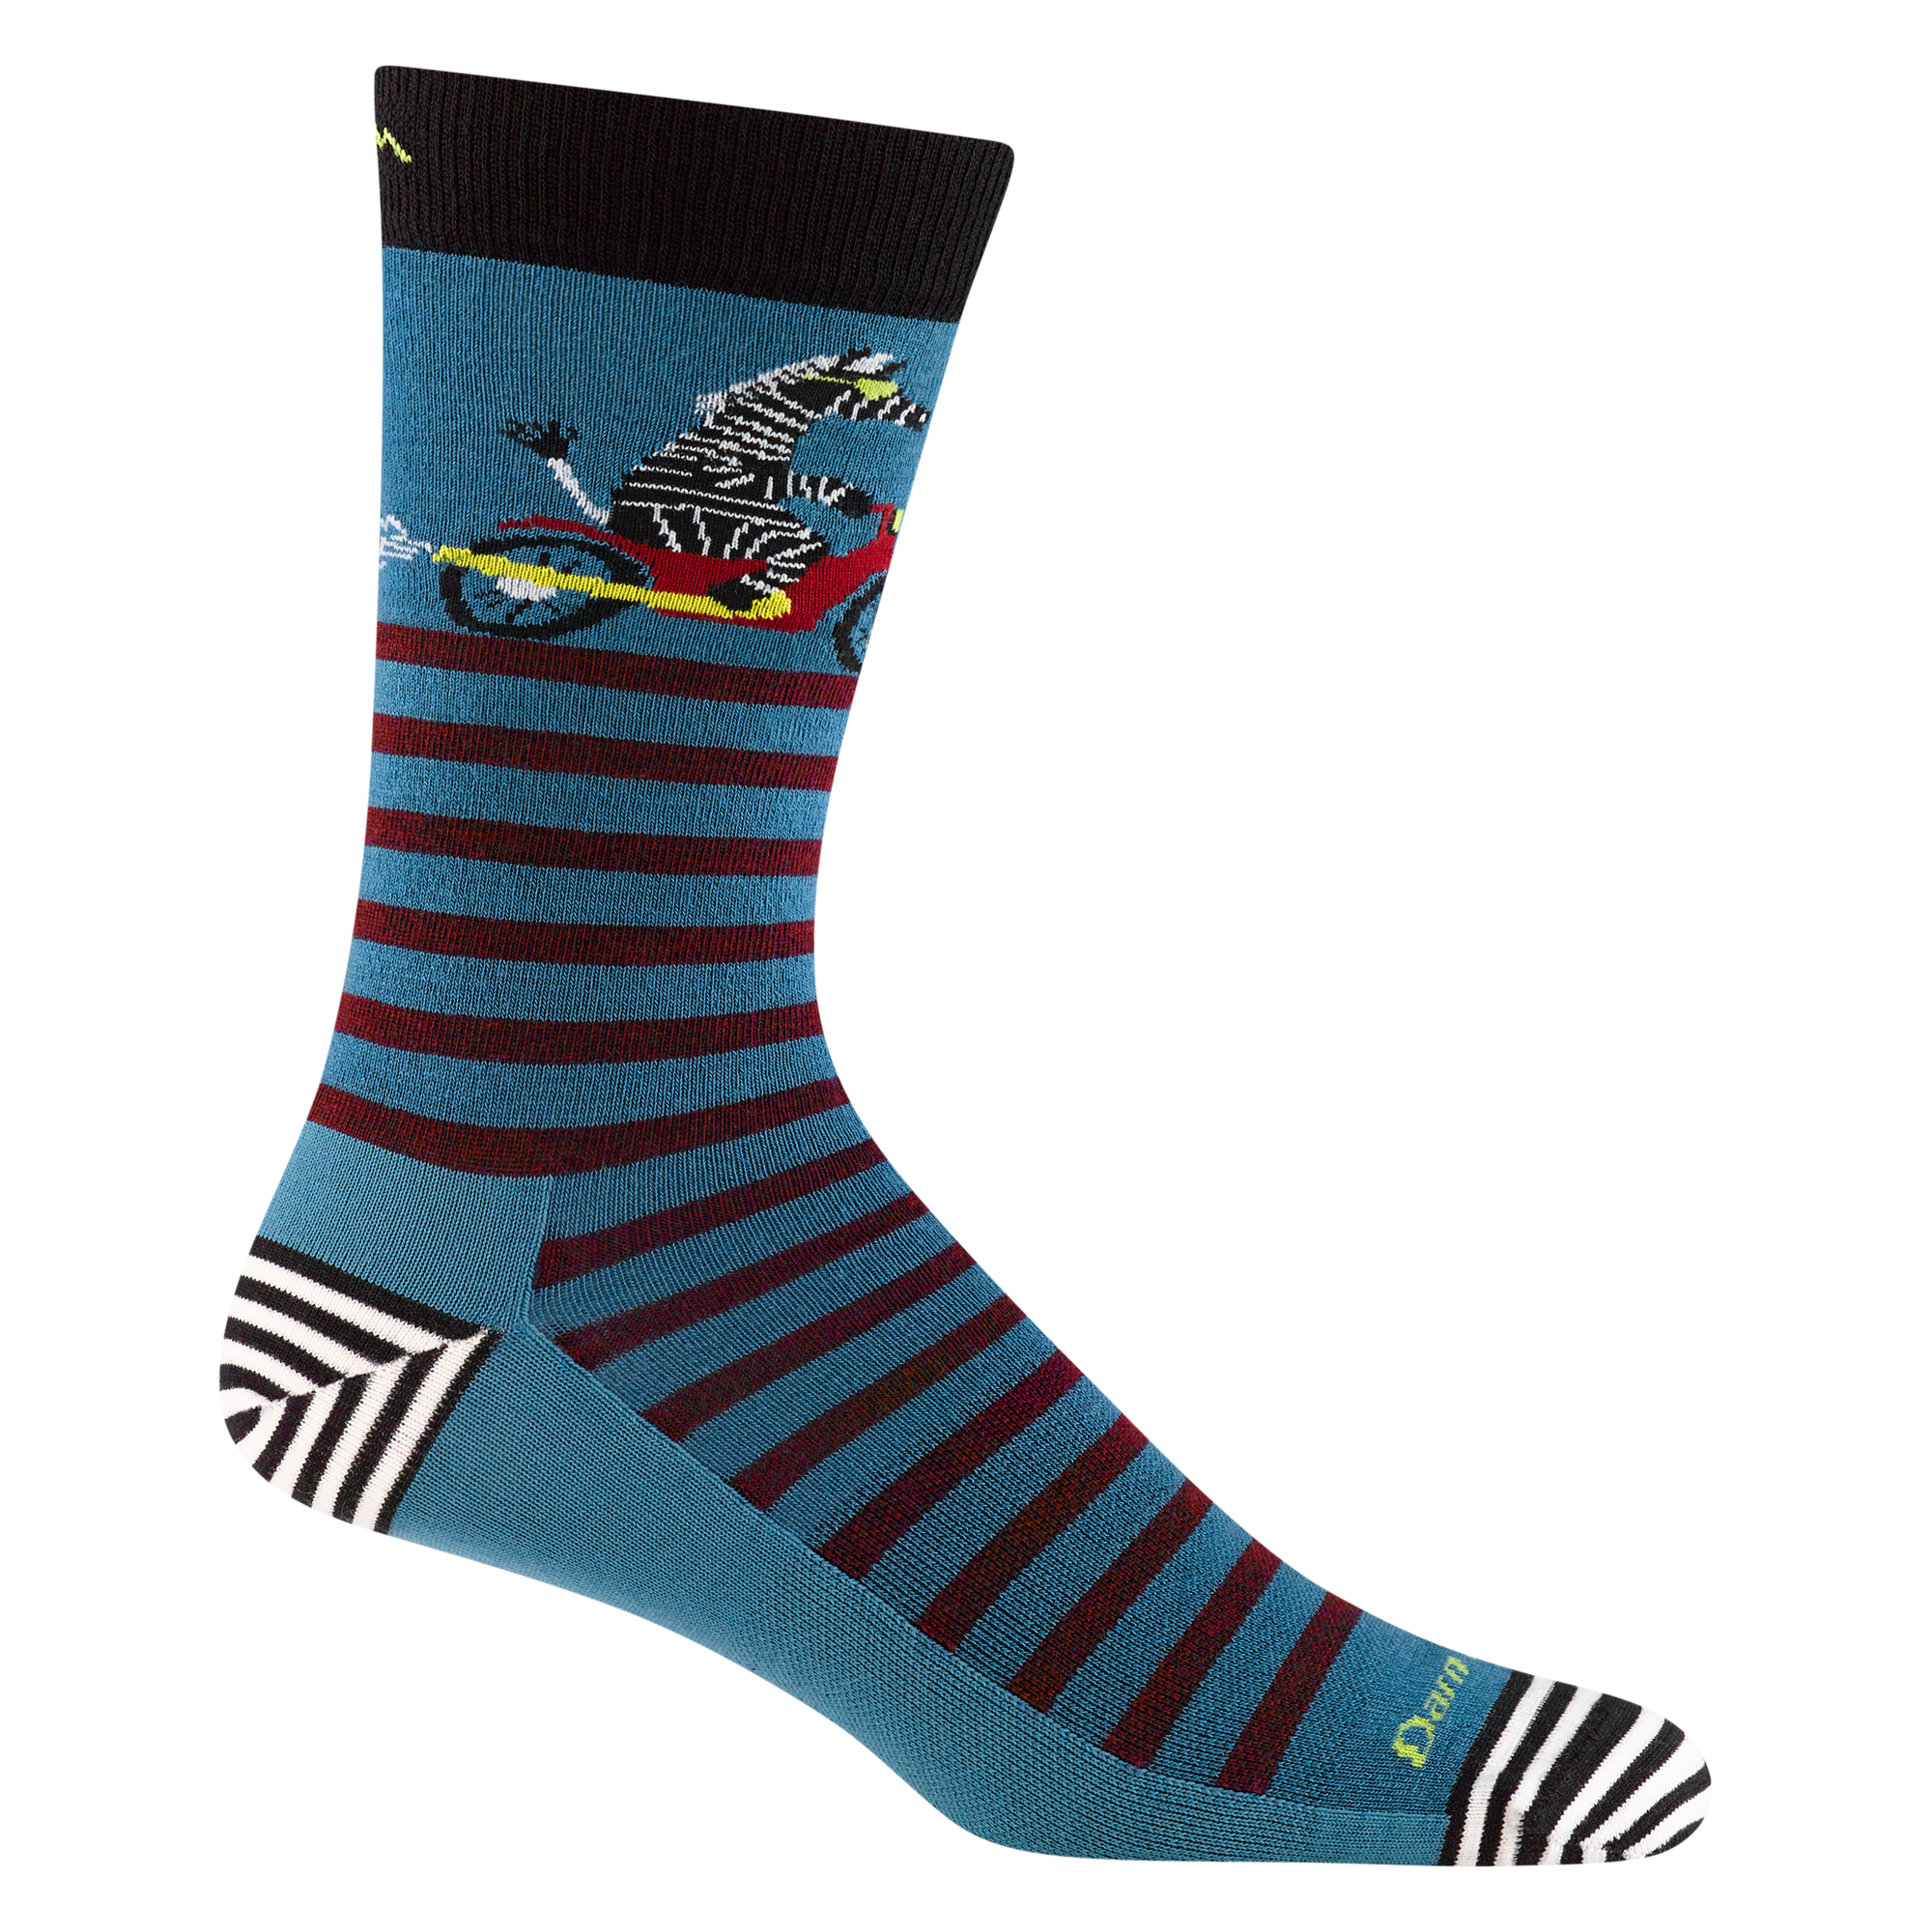 6066 men's animal haus crew lifestyle sock in cascade blue with striped toe/heel accent and a zebra riding a motorcycle